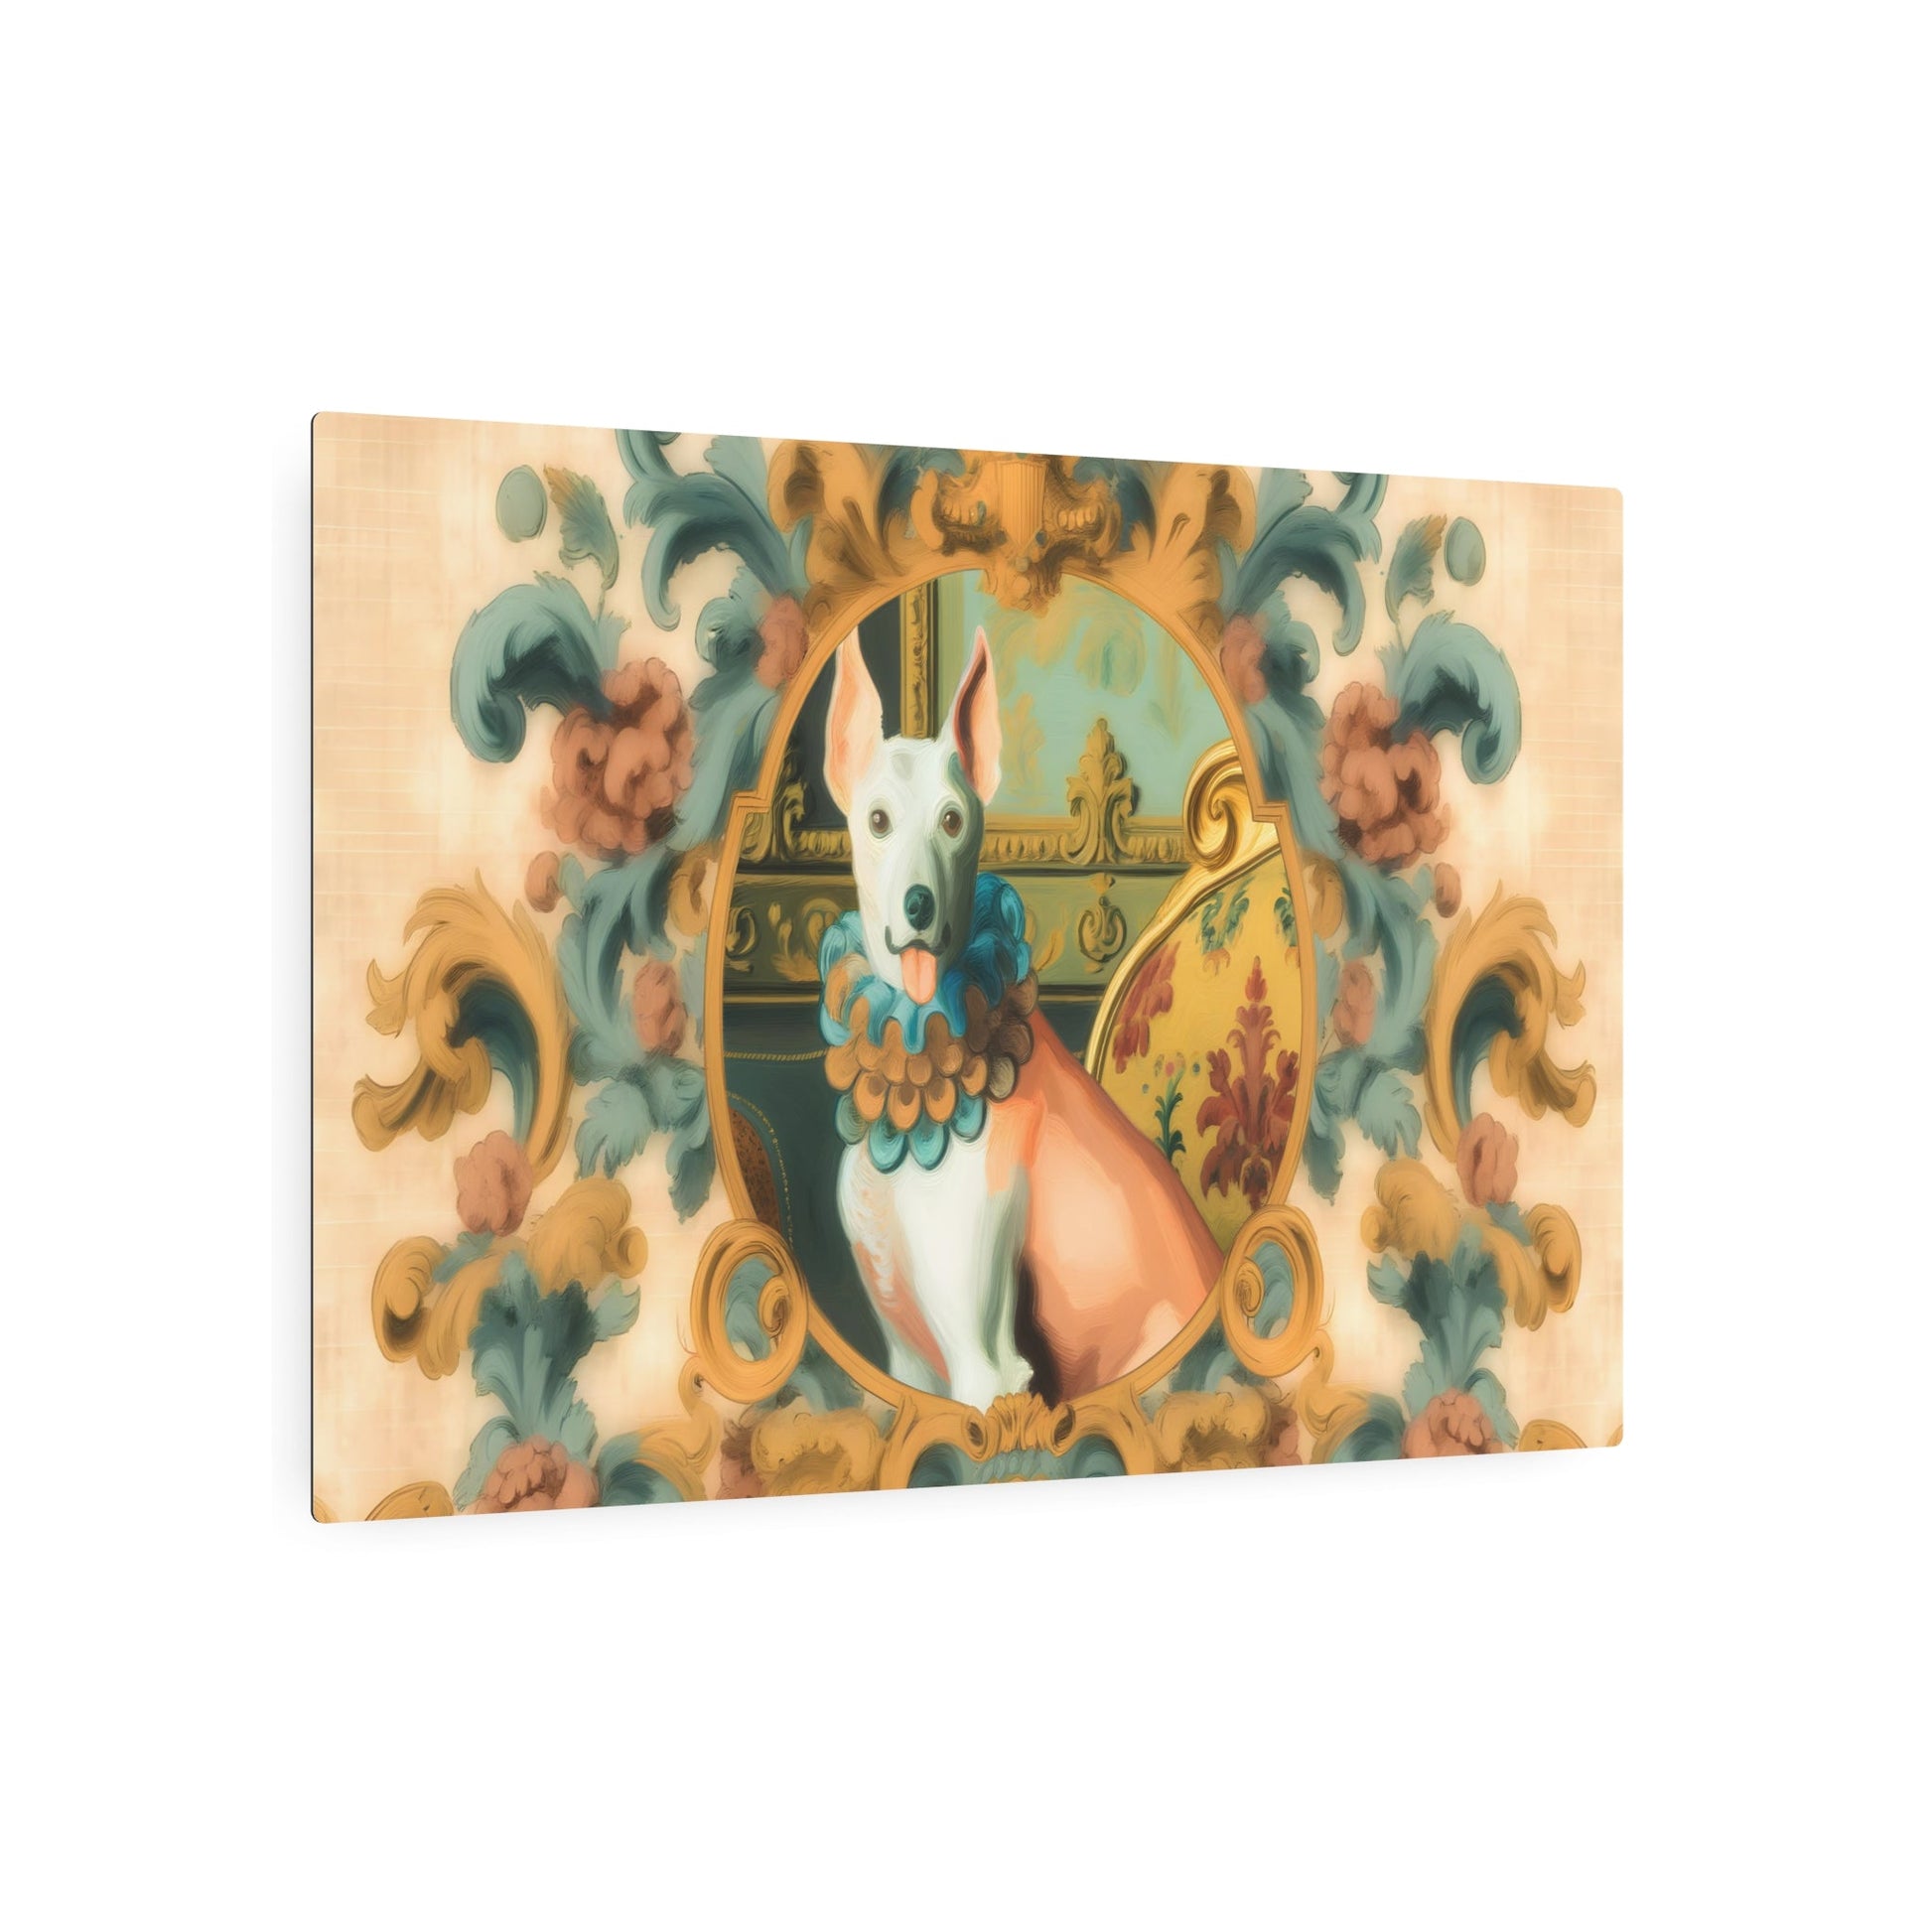 Metal Poster Art | "Luxurious Rococo-Style Dog Painting in Soft Pastels - Intricate Detail Western Art" - Metal Poster Art 36″ x 24″ (Horizontal) 0.12''